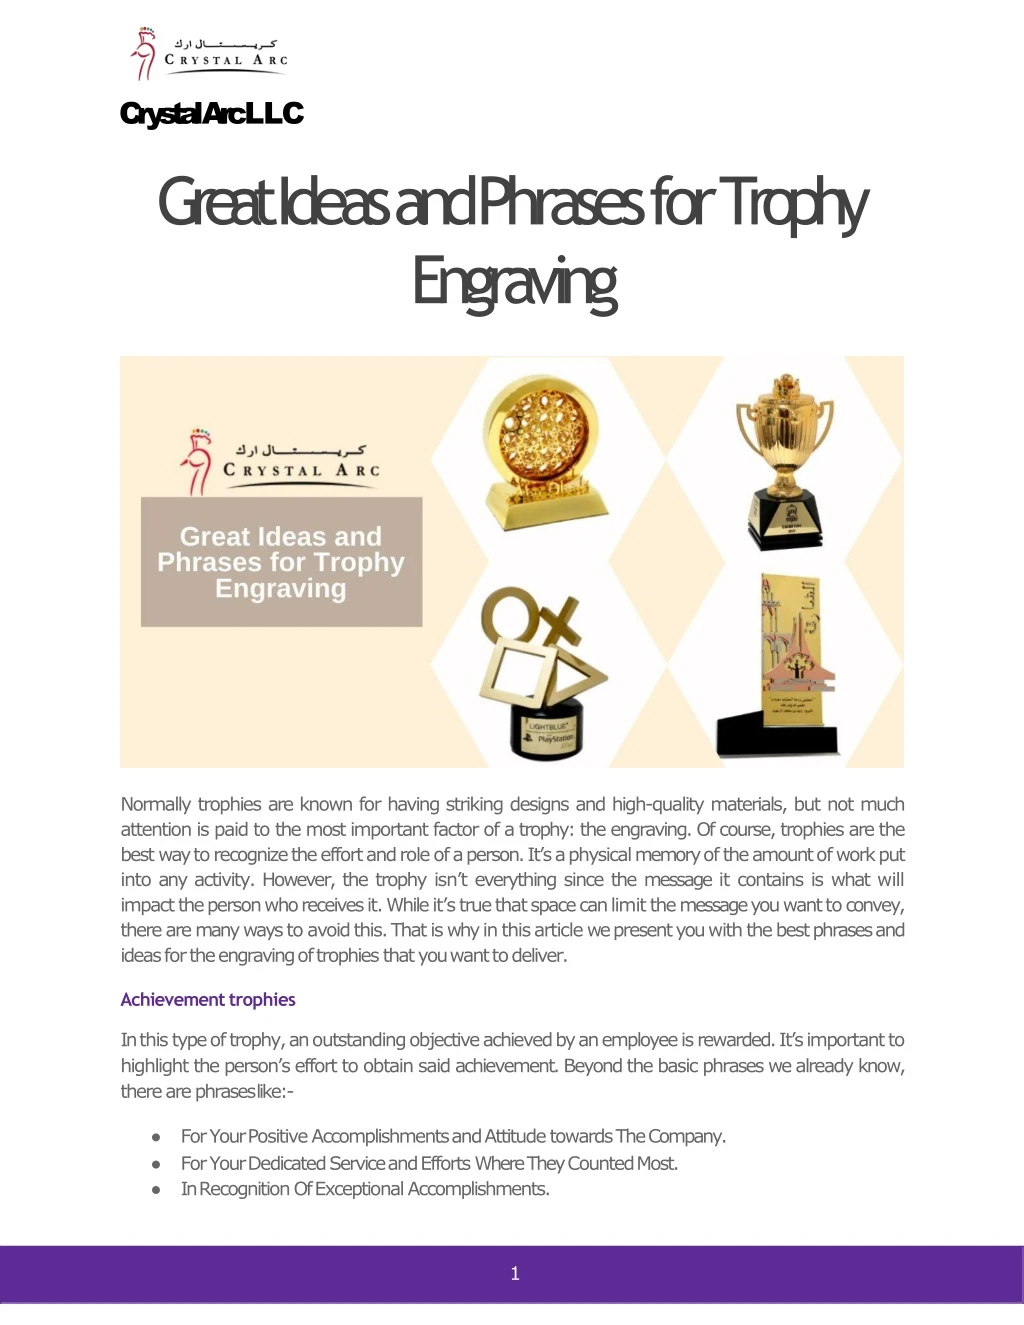 great ideas and phrases for trophy engraving